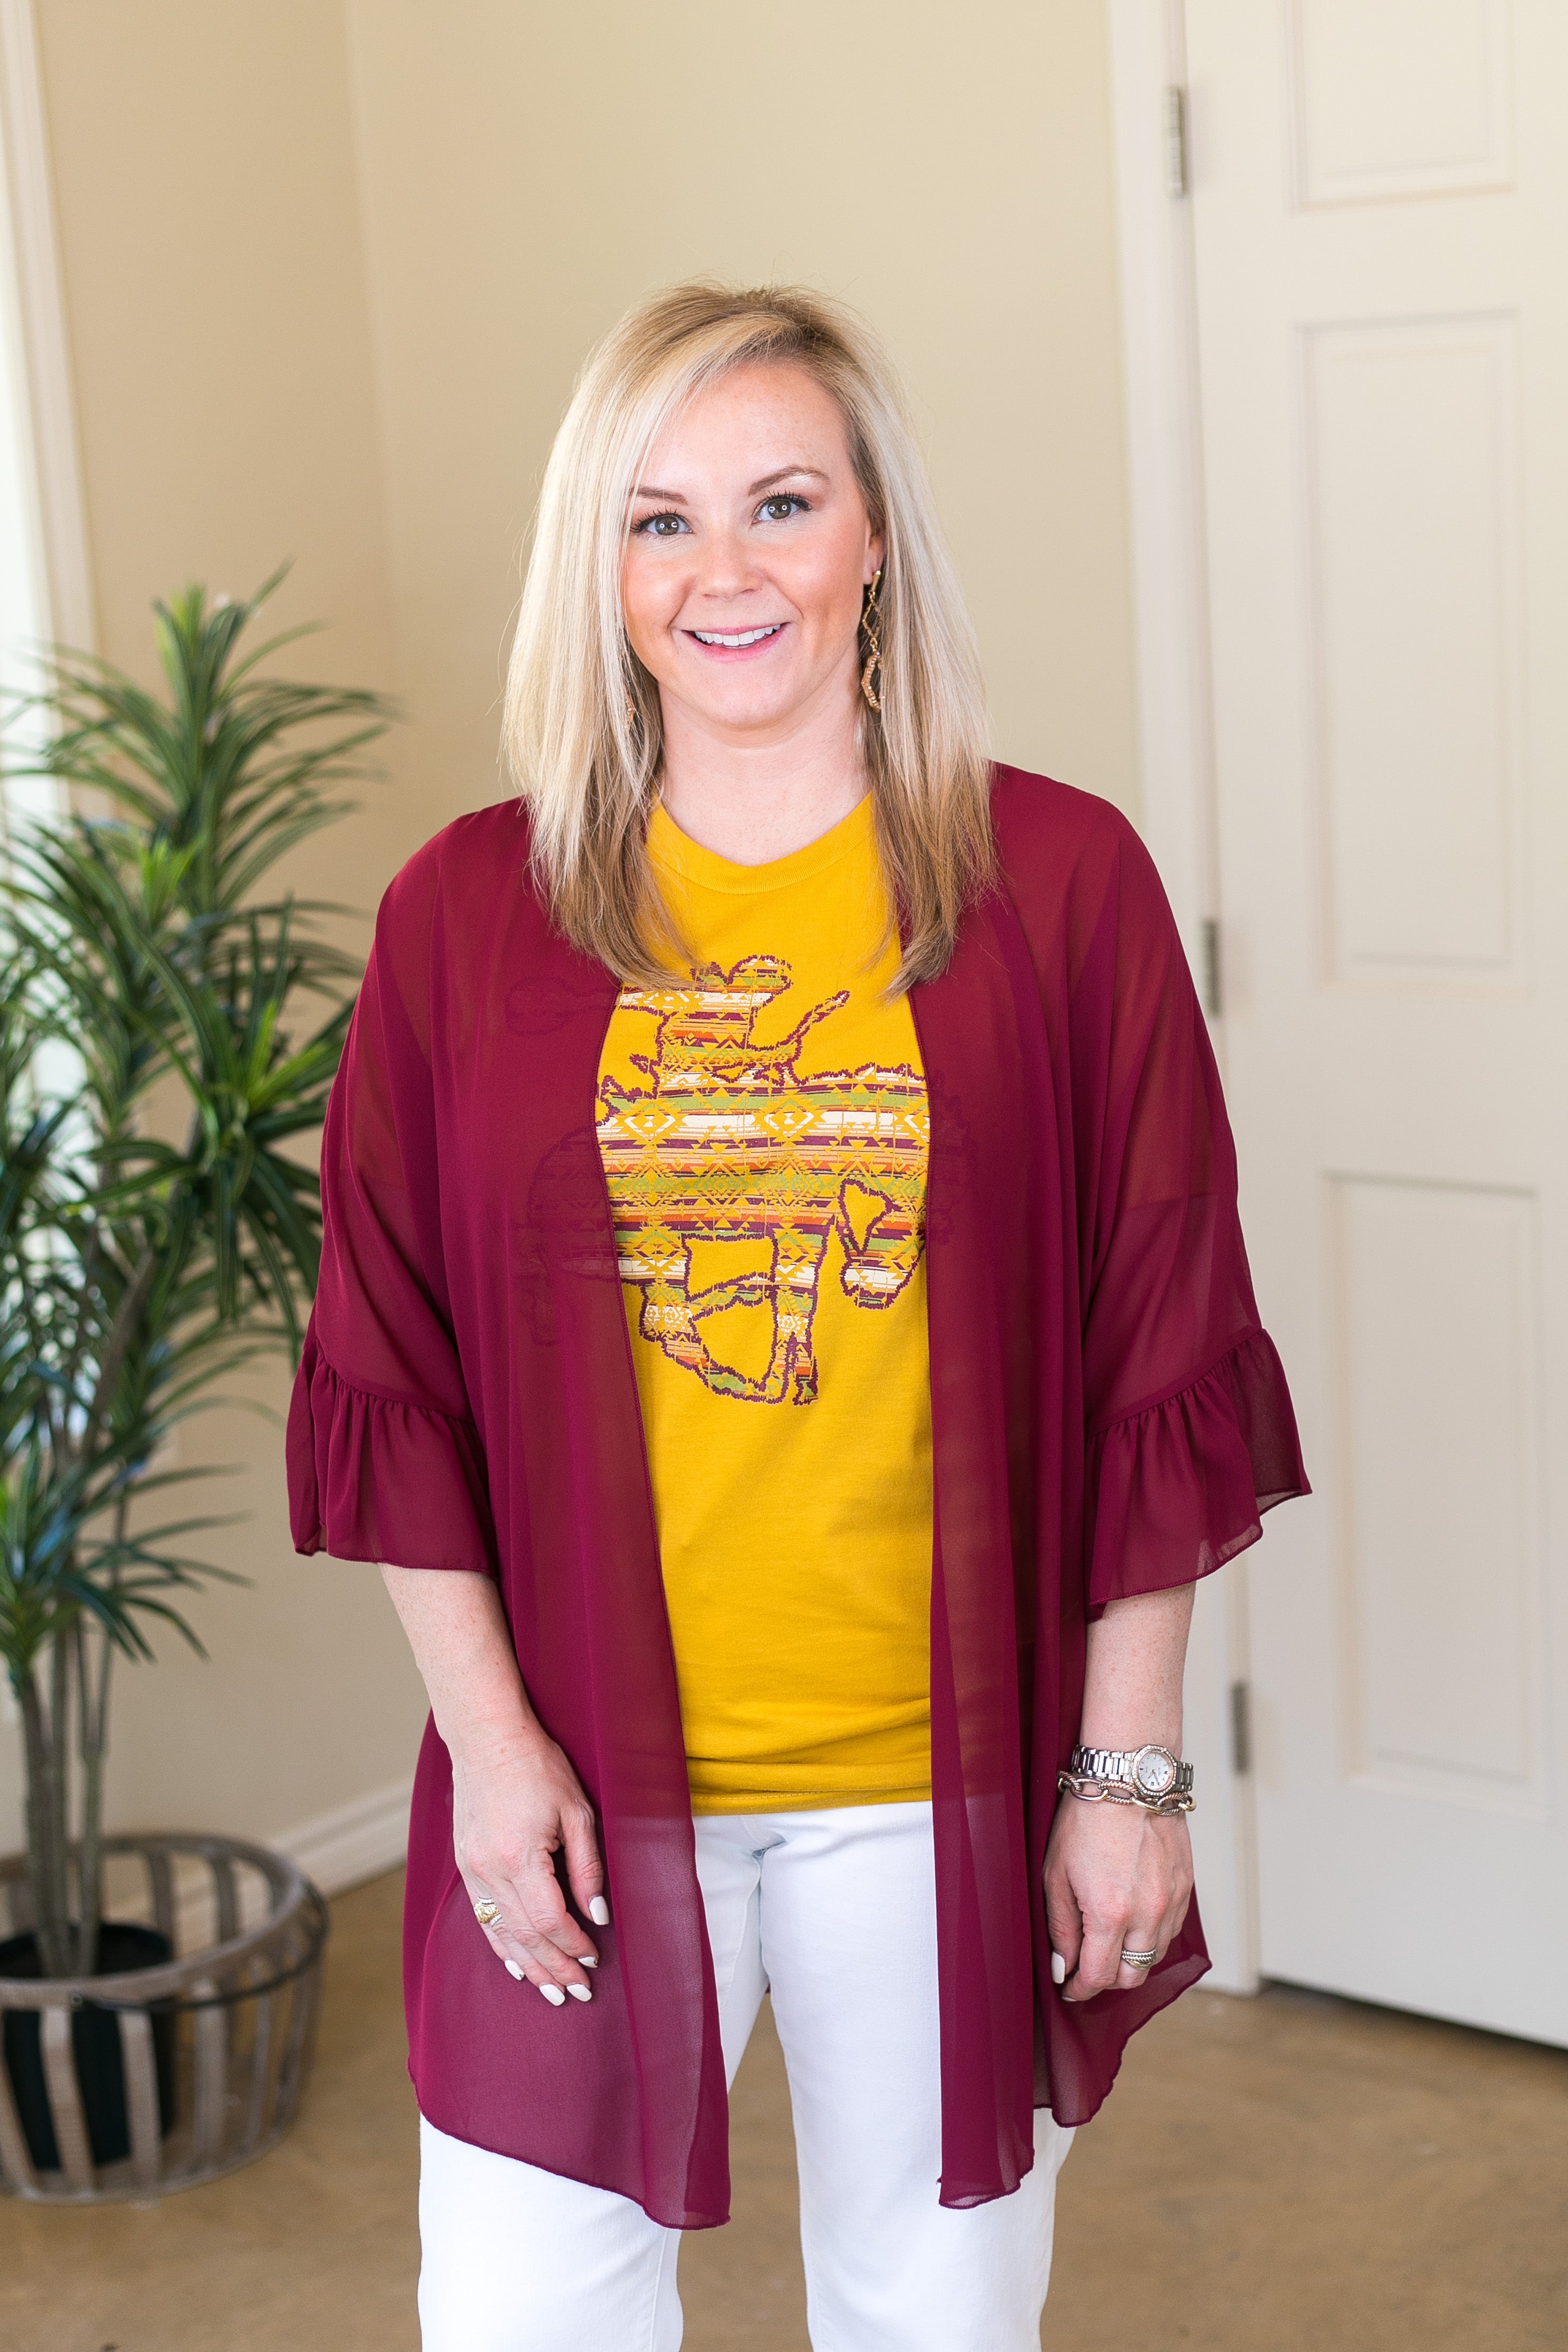 Ain't My First Rodeo Aztec Print Saddle Bronc Short Sleeve Tee Shirt in Mustard Yellow - Giddy Up Glamour Boutique